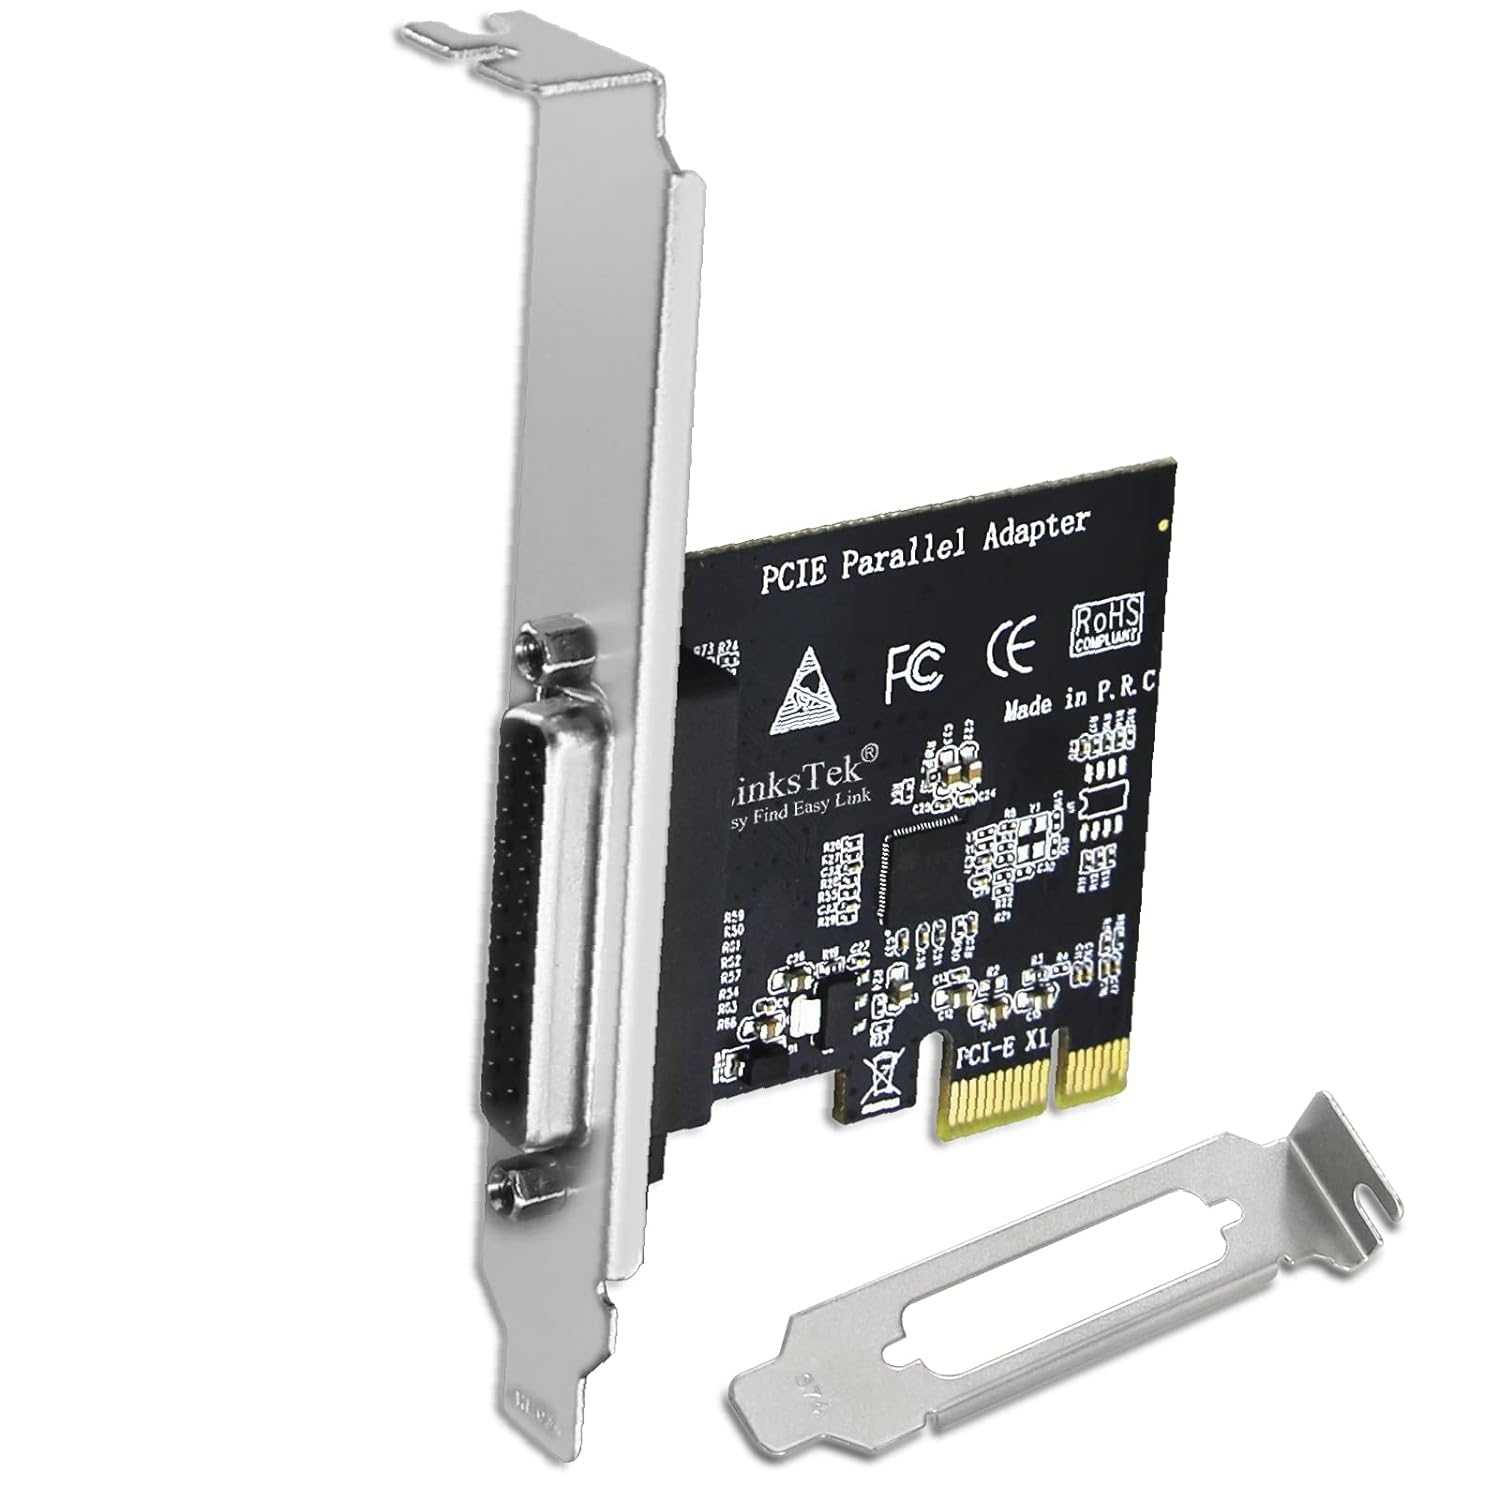 LinksTek 1 Port PCI Express Parallel Host Controller Card-DB25 PCIE Parallel Adapter Comply with IEEE 1284 Standard Support SPP/EPP/ECP | Low Profile Bracket (PCIE-PA1)